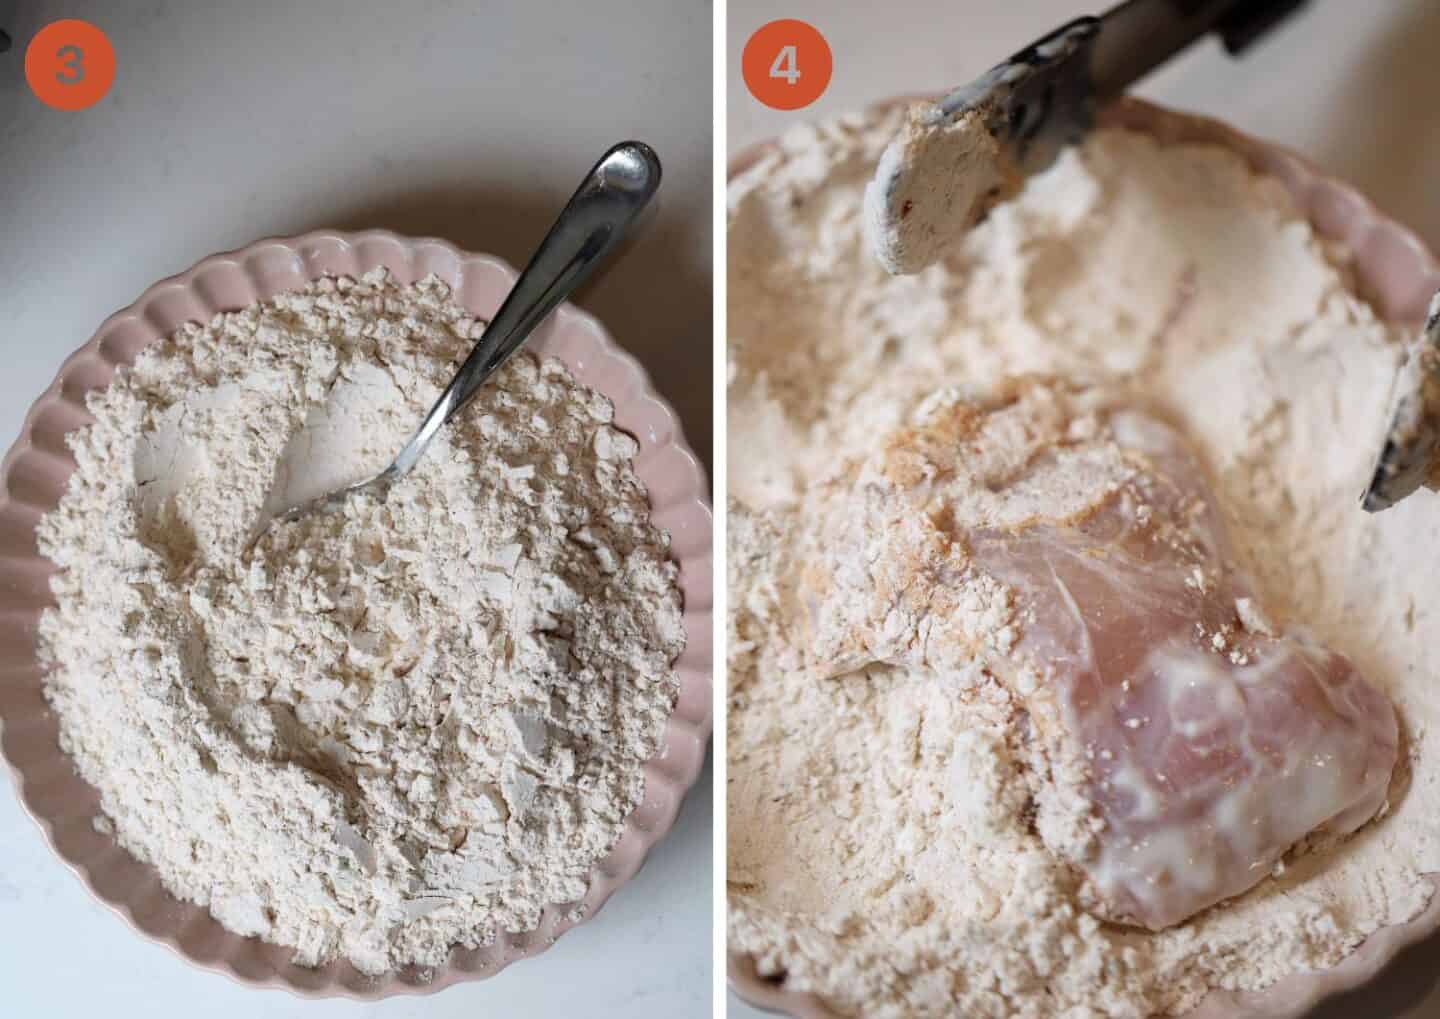 Left: the fried chicken coating and right: coating the chicken thighs.